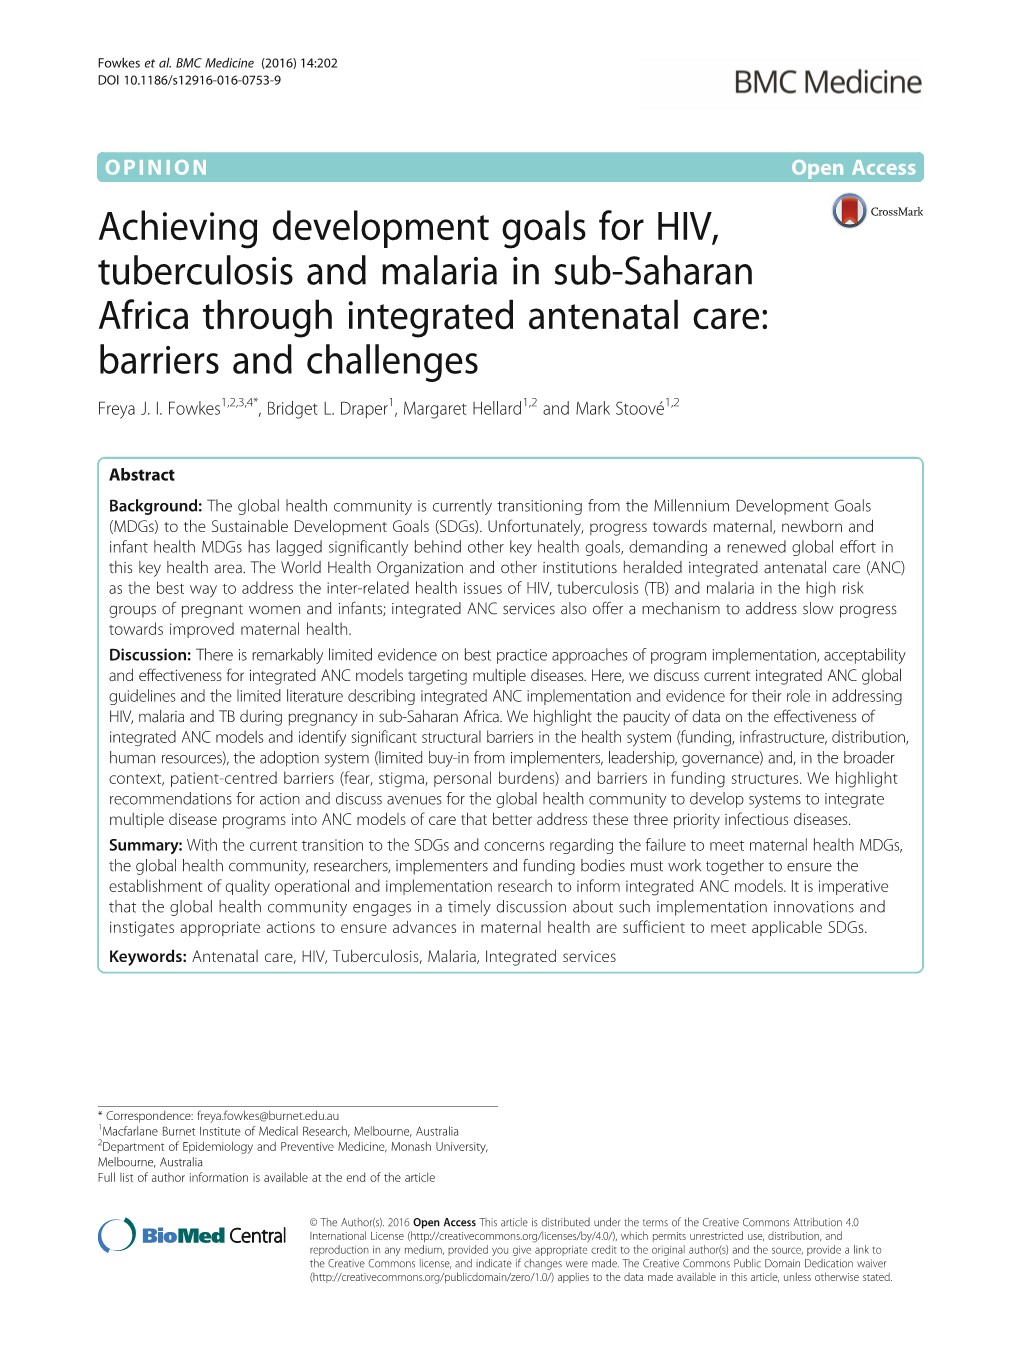 Achieving Development Goals for HIV, Tuberculosis and Malaria in Sub-Saharan Africa Through Integrated Antenatal Care: Barriers and Challenges Freya J